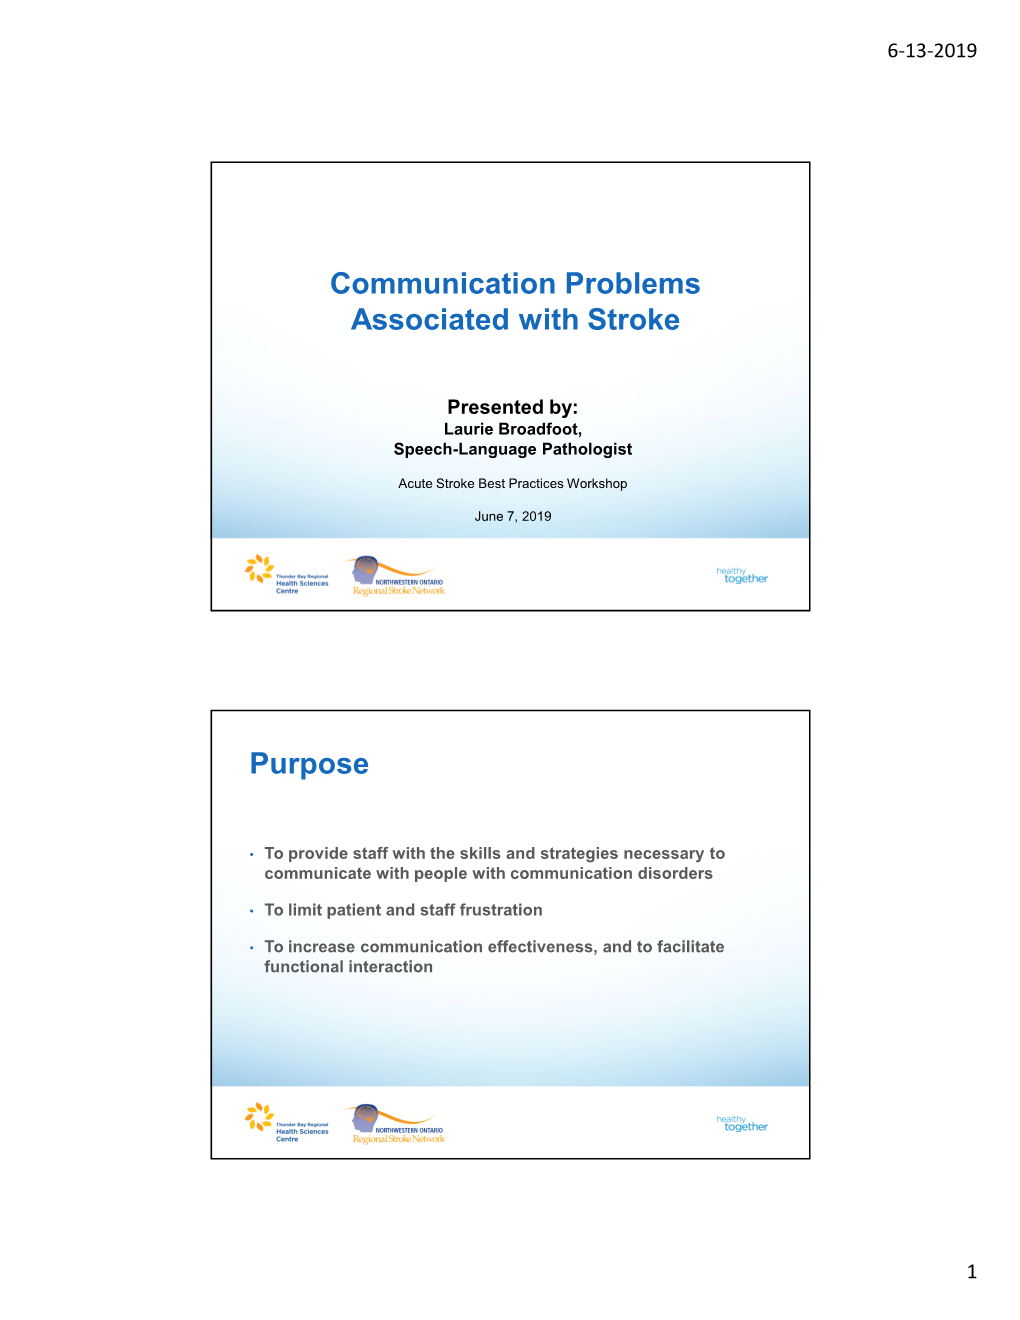 Communication Problems Associated with Stroke Purpose